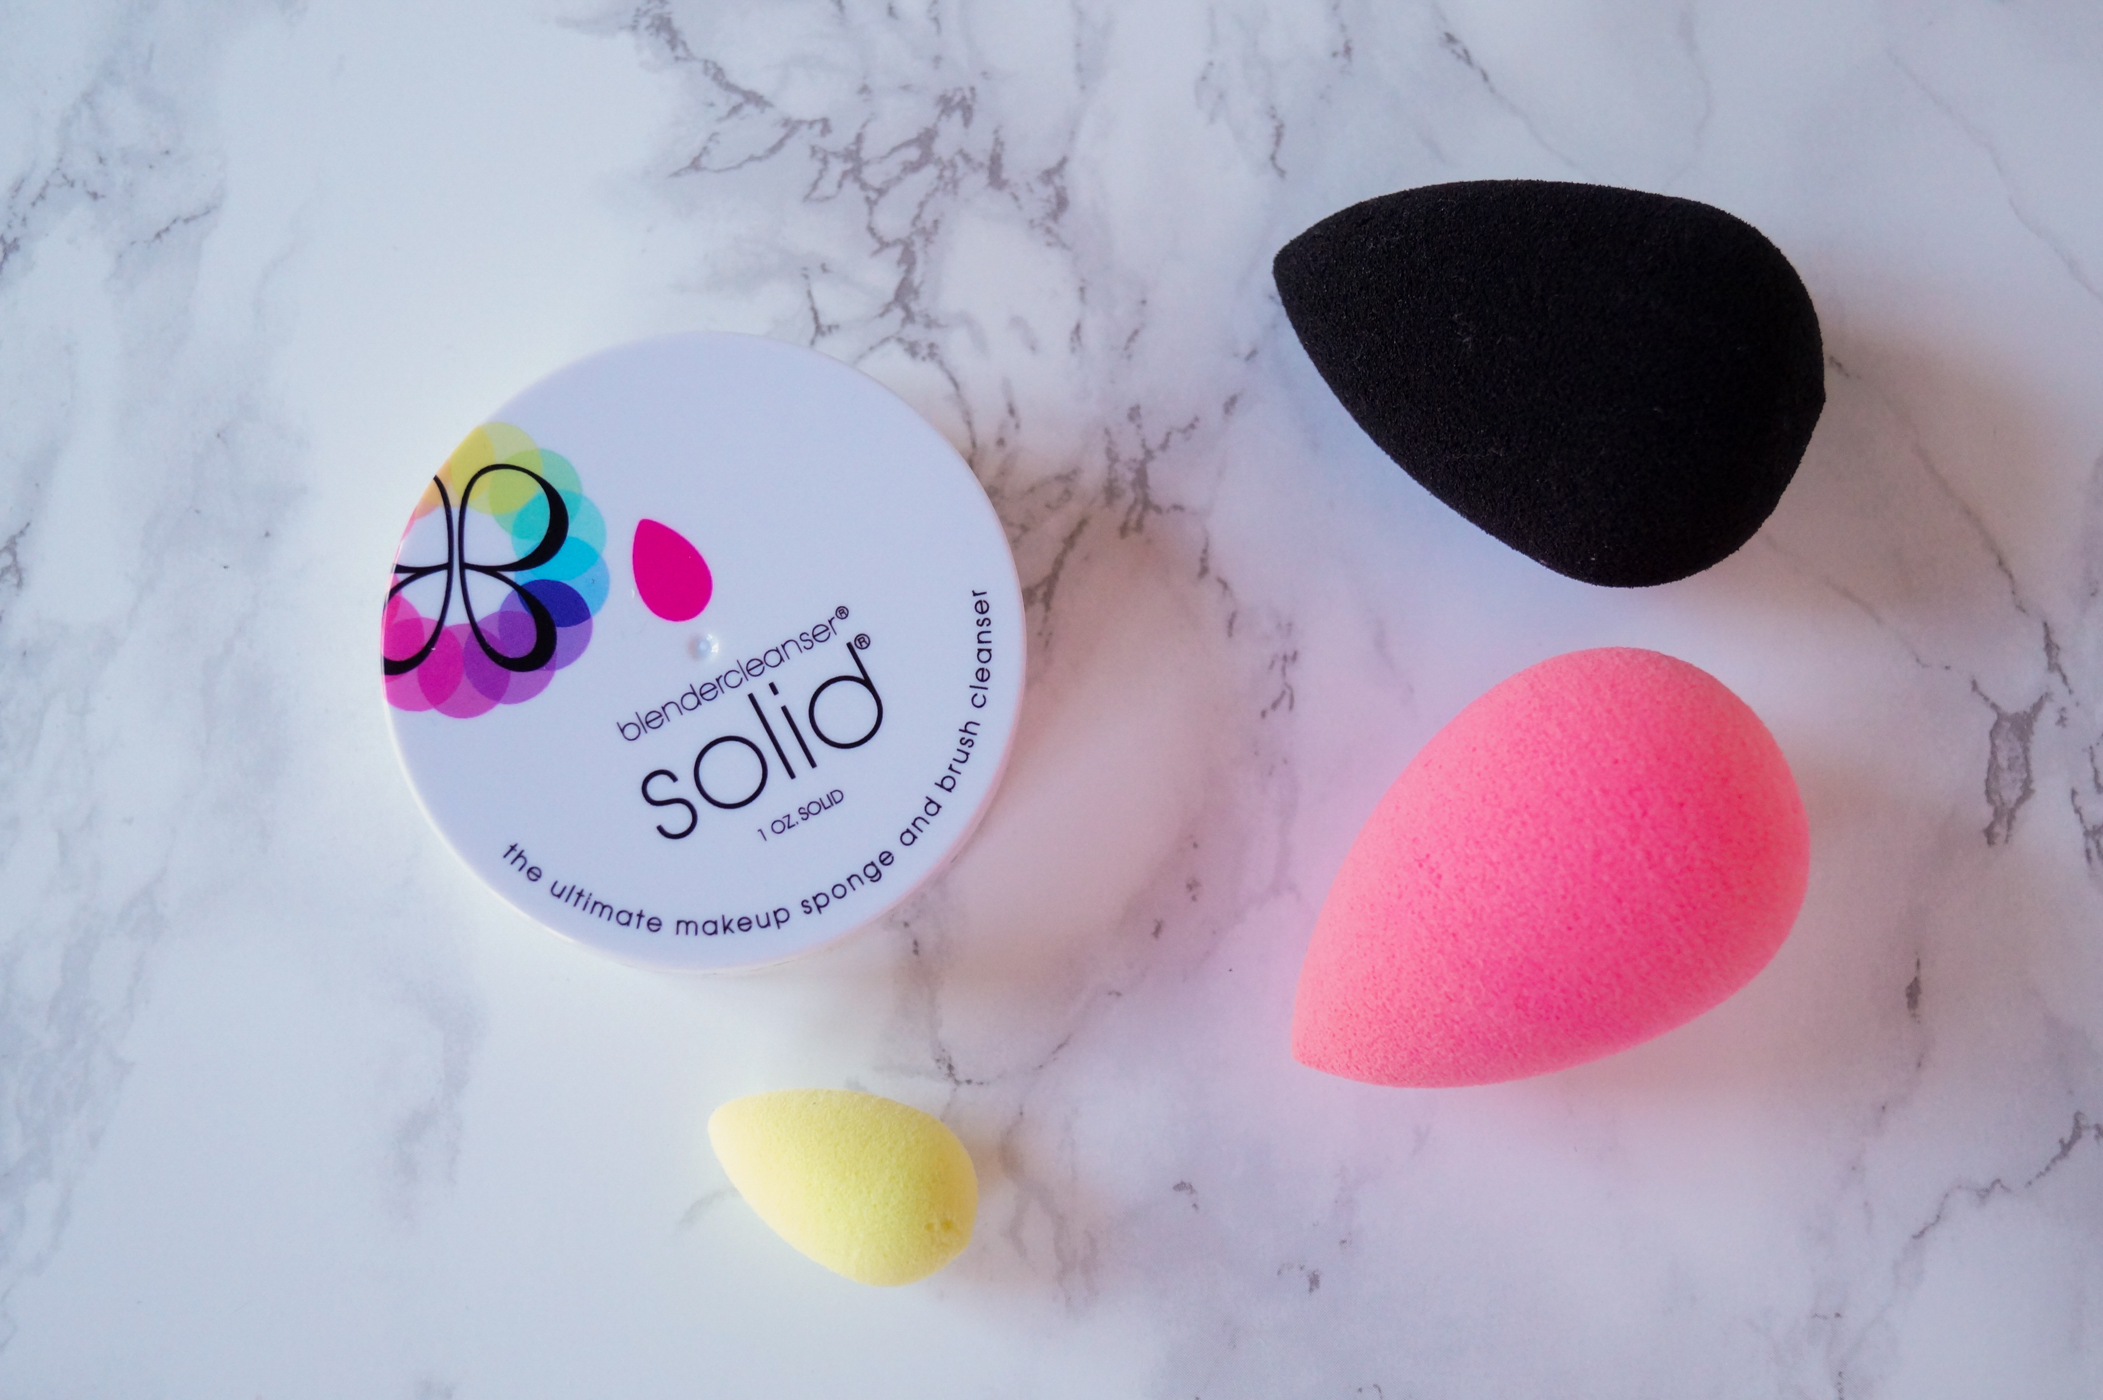 Solid cleanser by Beauty Blender (1)